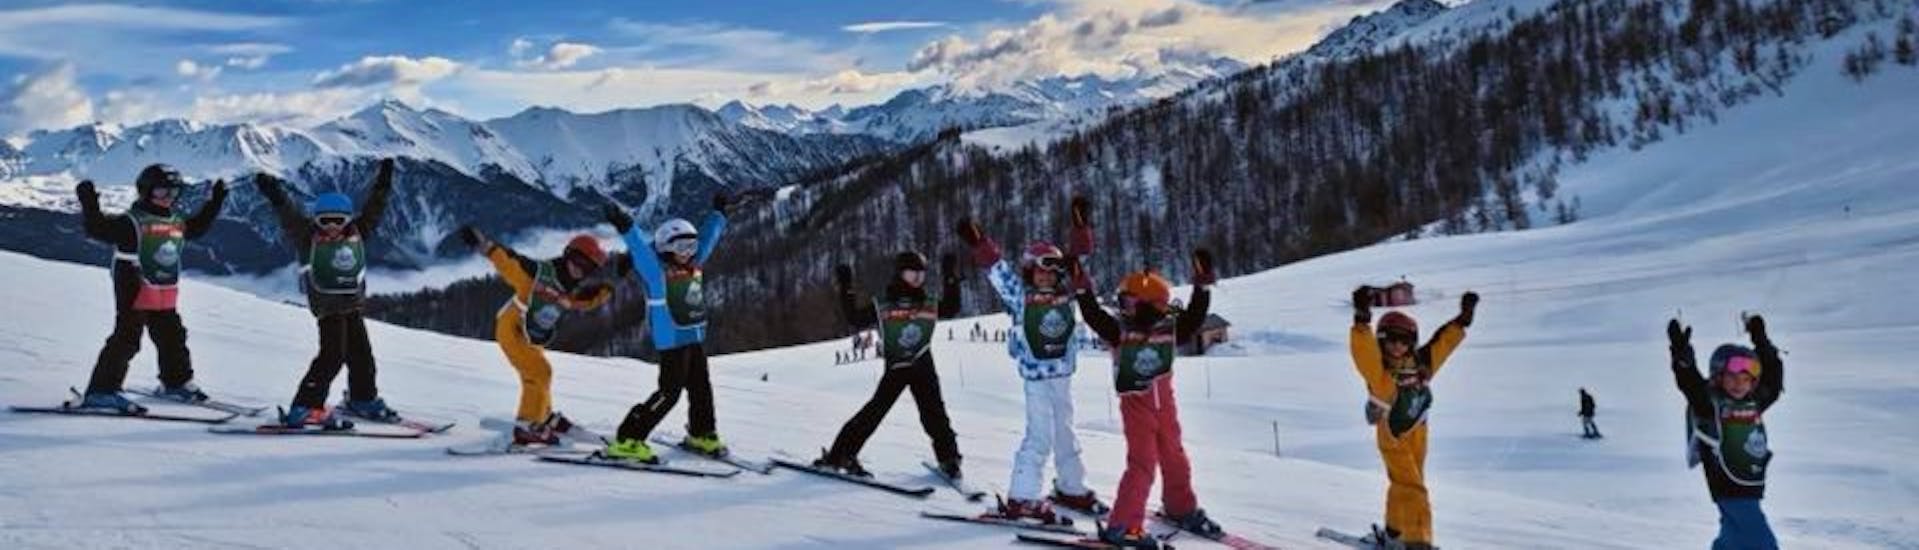 Skiers follow their instructor on the slopes of Serre Chevalier Villeneuve during kids ski lessons for intermediate skiers with the ski school ESF.